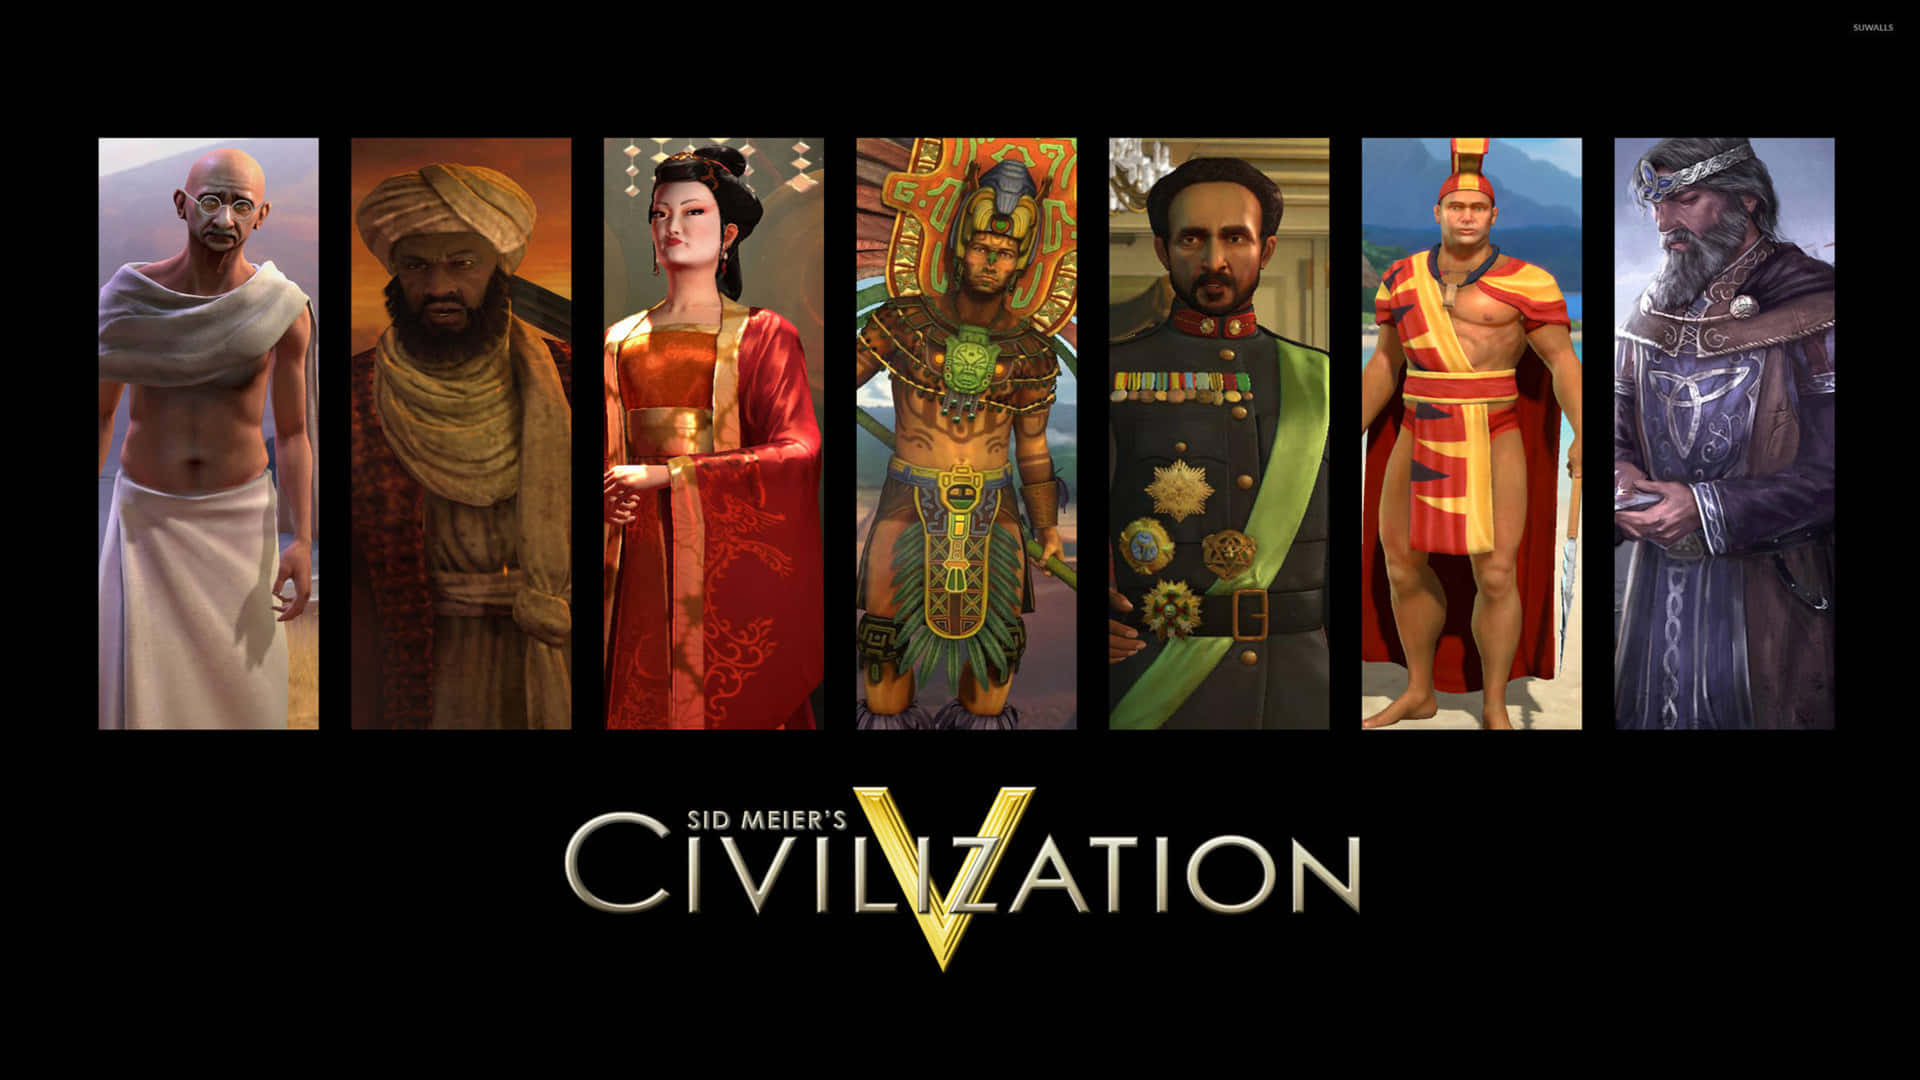 Civilization V - A Group Of People In Costumes